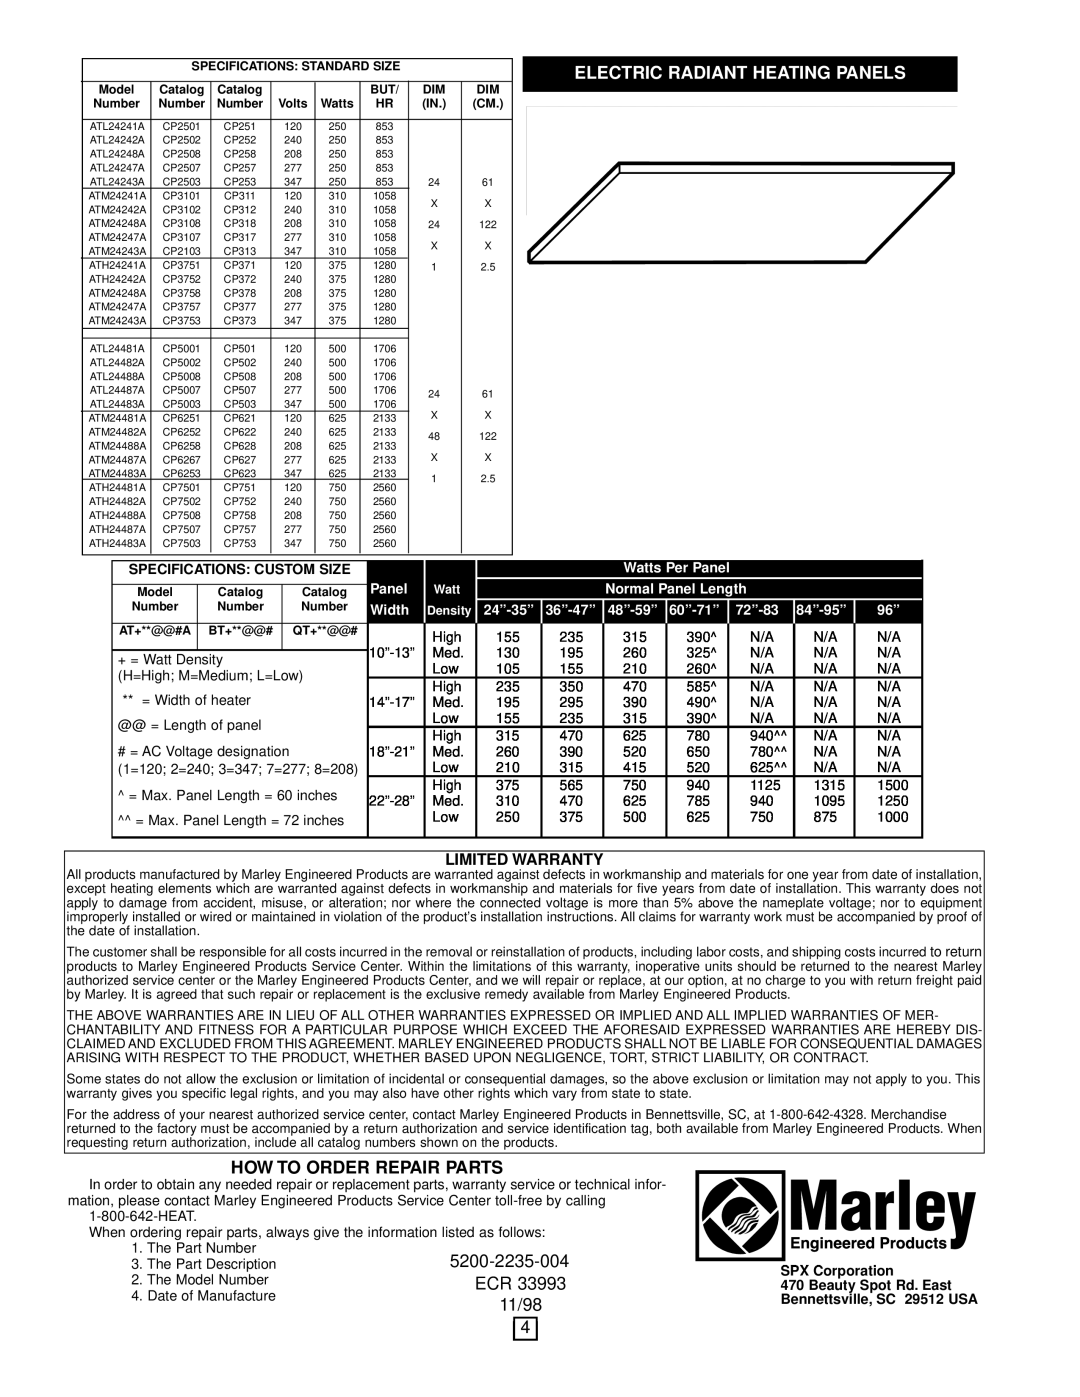 Marley Engineered Products Electric Radiant Ceiling Heat Panels How To Order Repair Parts, 11/98, Watts Per Panel, Width 